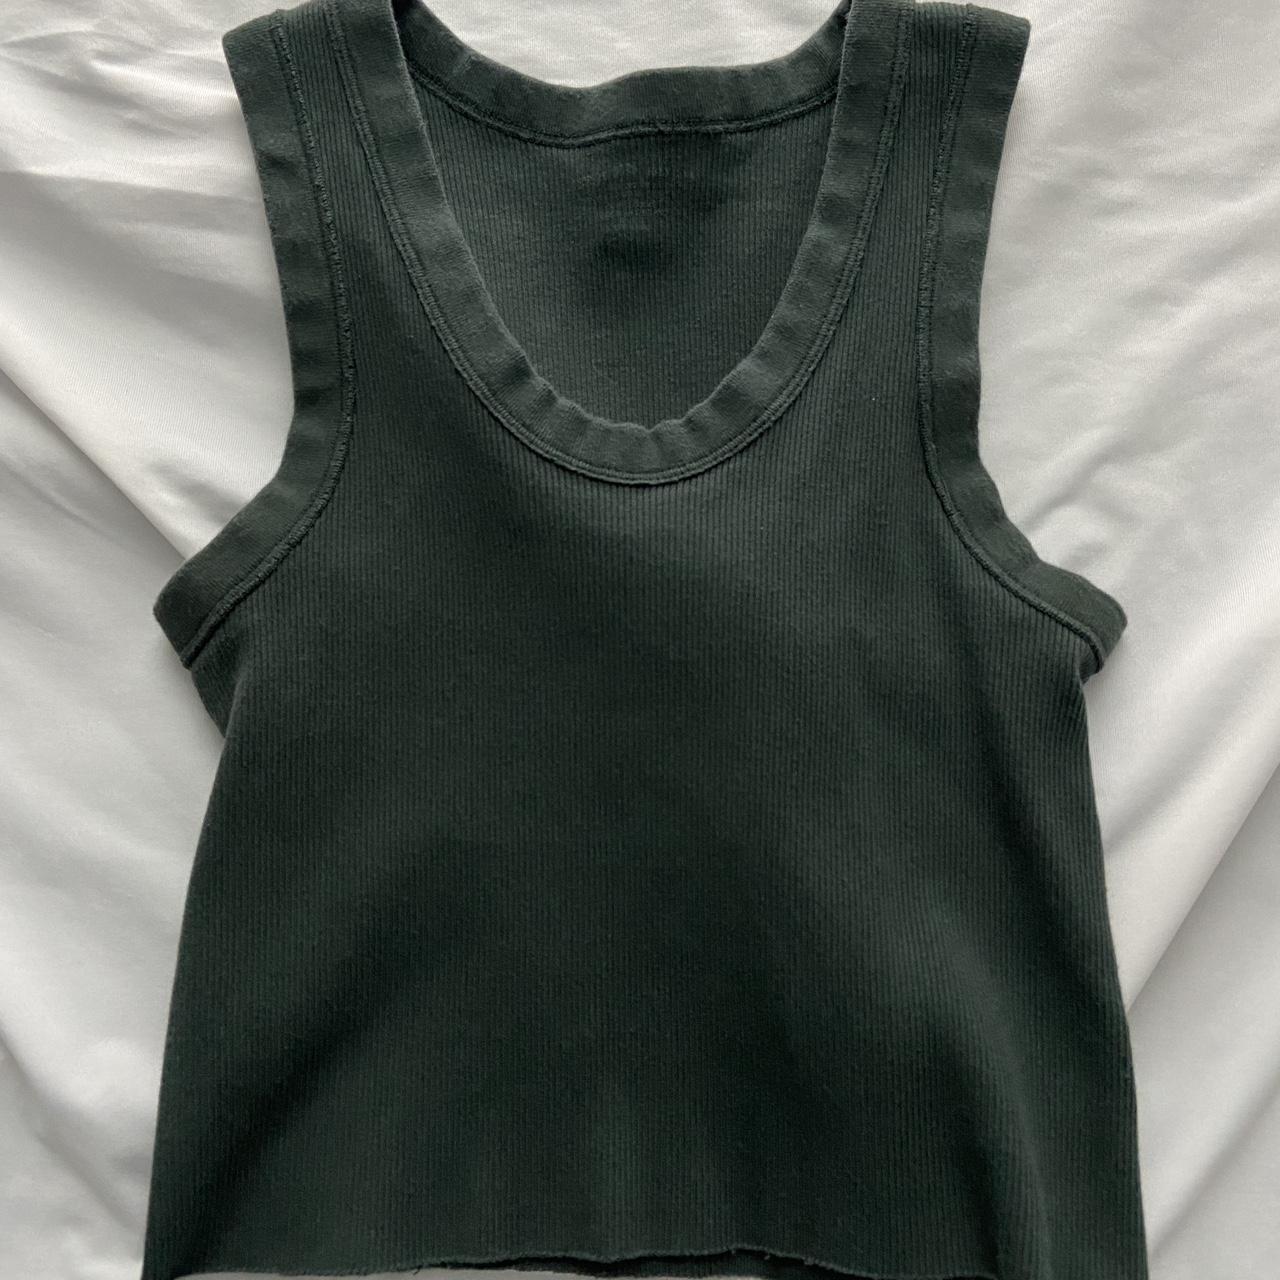 Brandy Melville NWT Connor tank green one size Size undefined